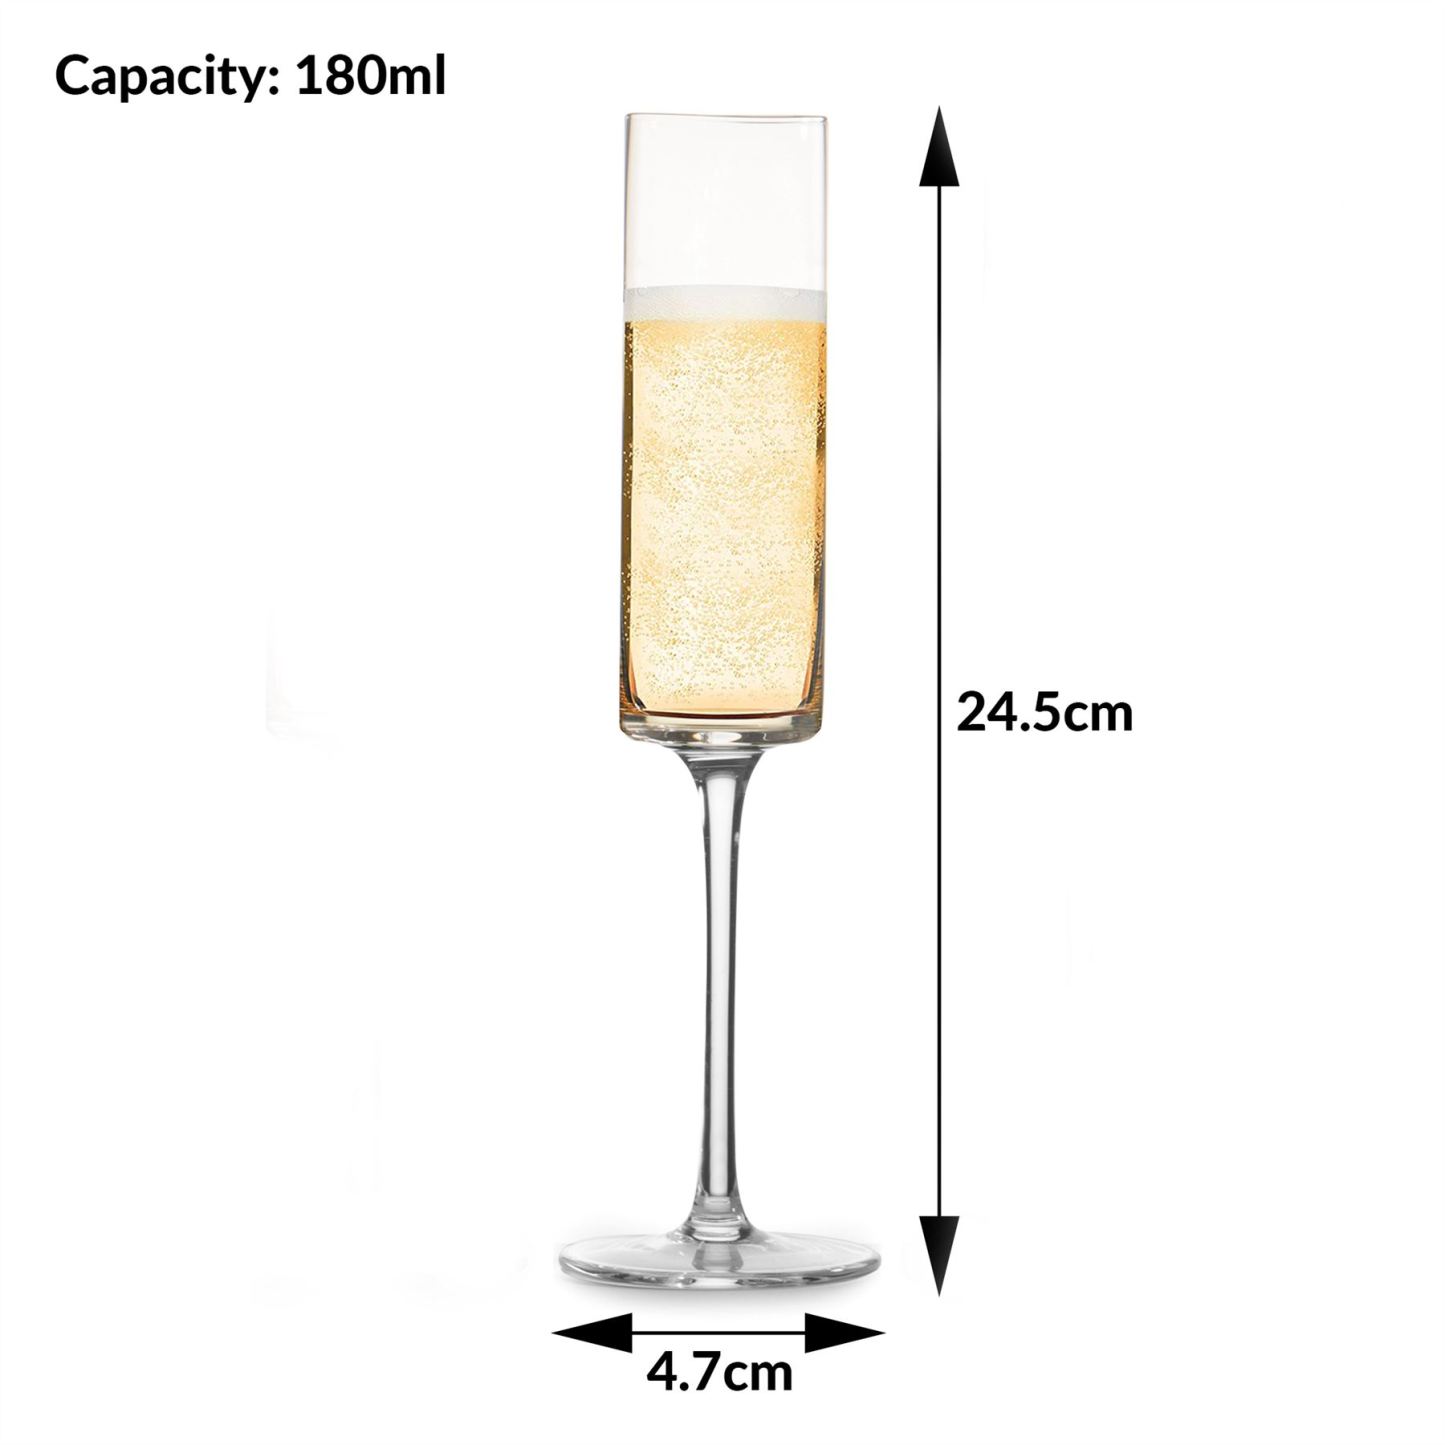 Edge Champagne Flutes - Set of 4 Clear | M&W